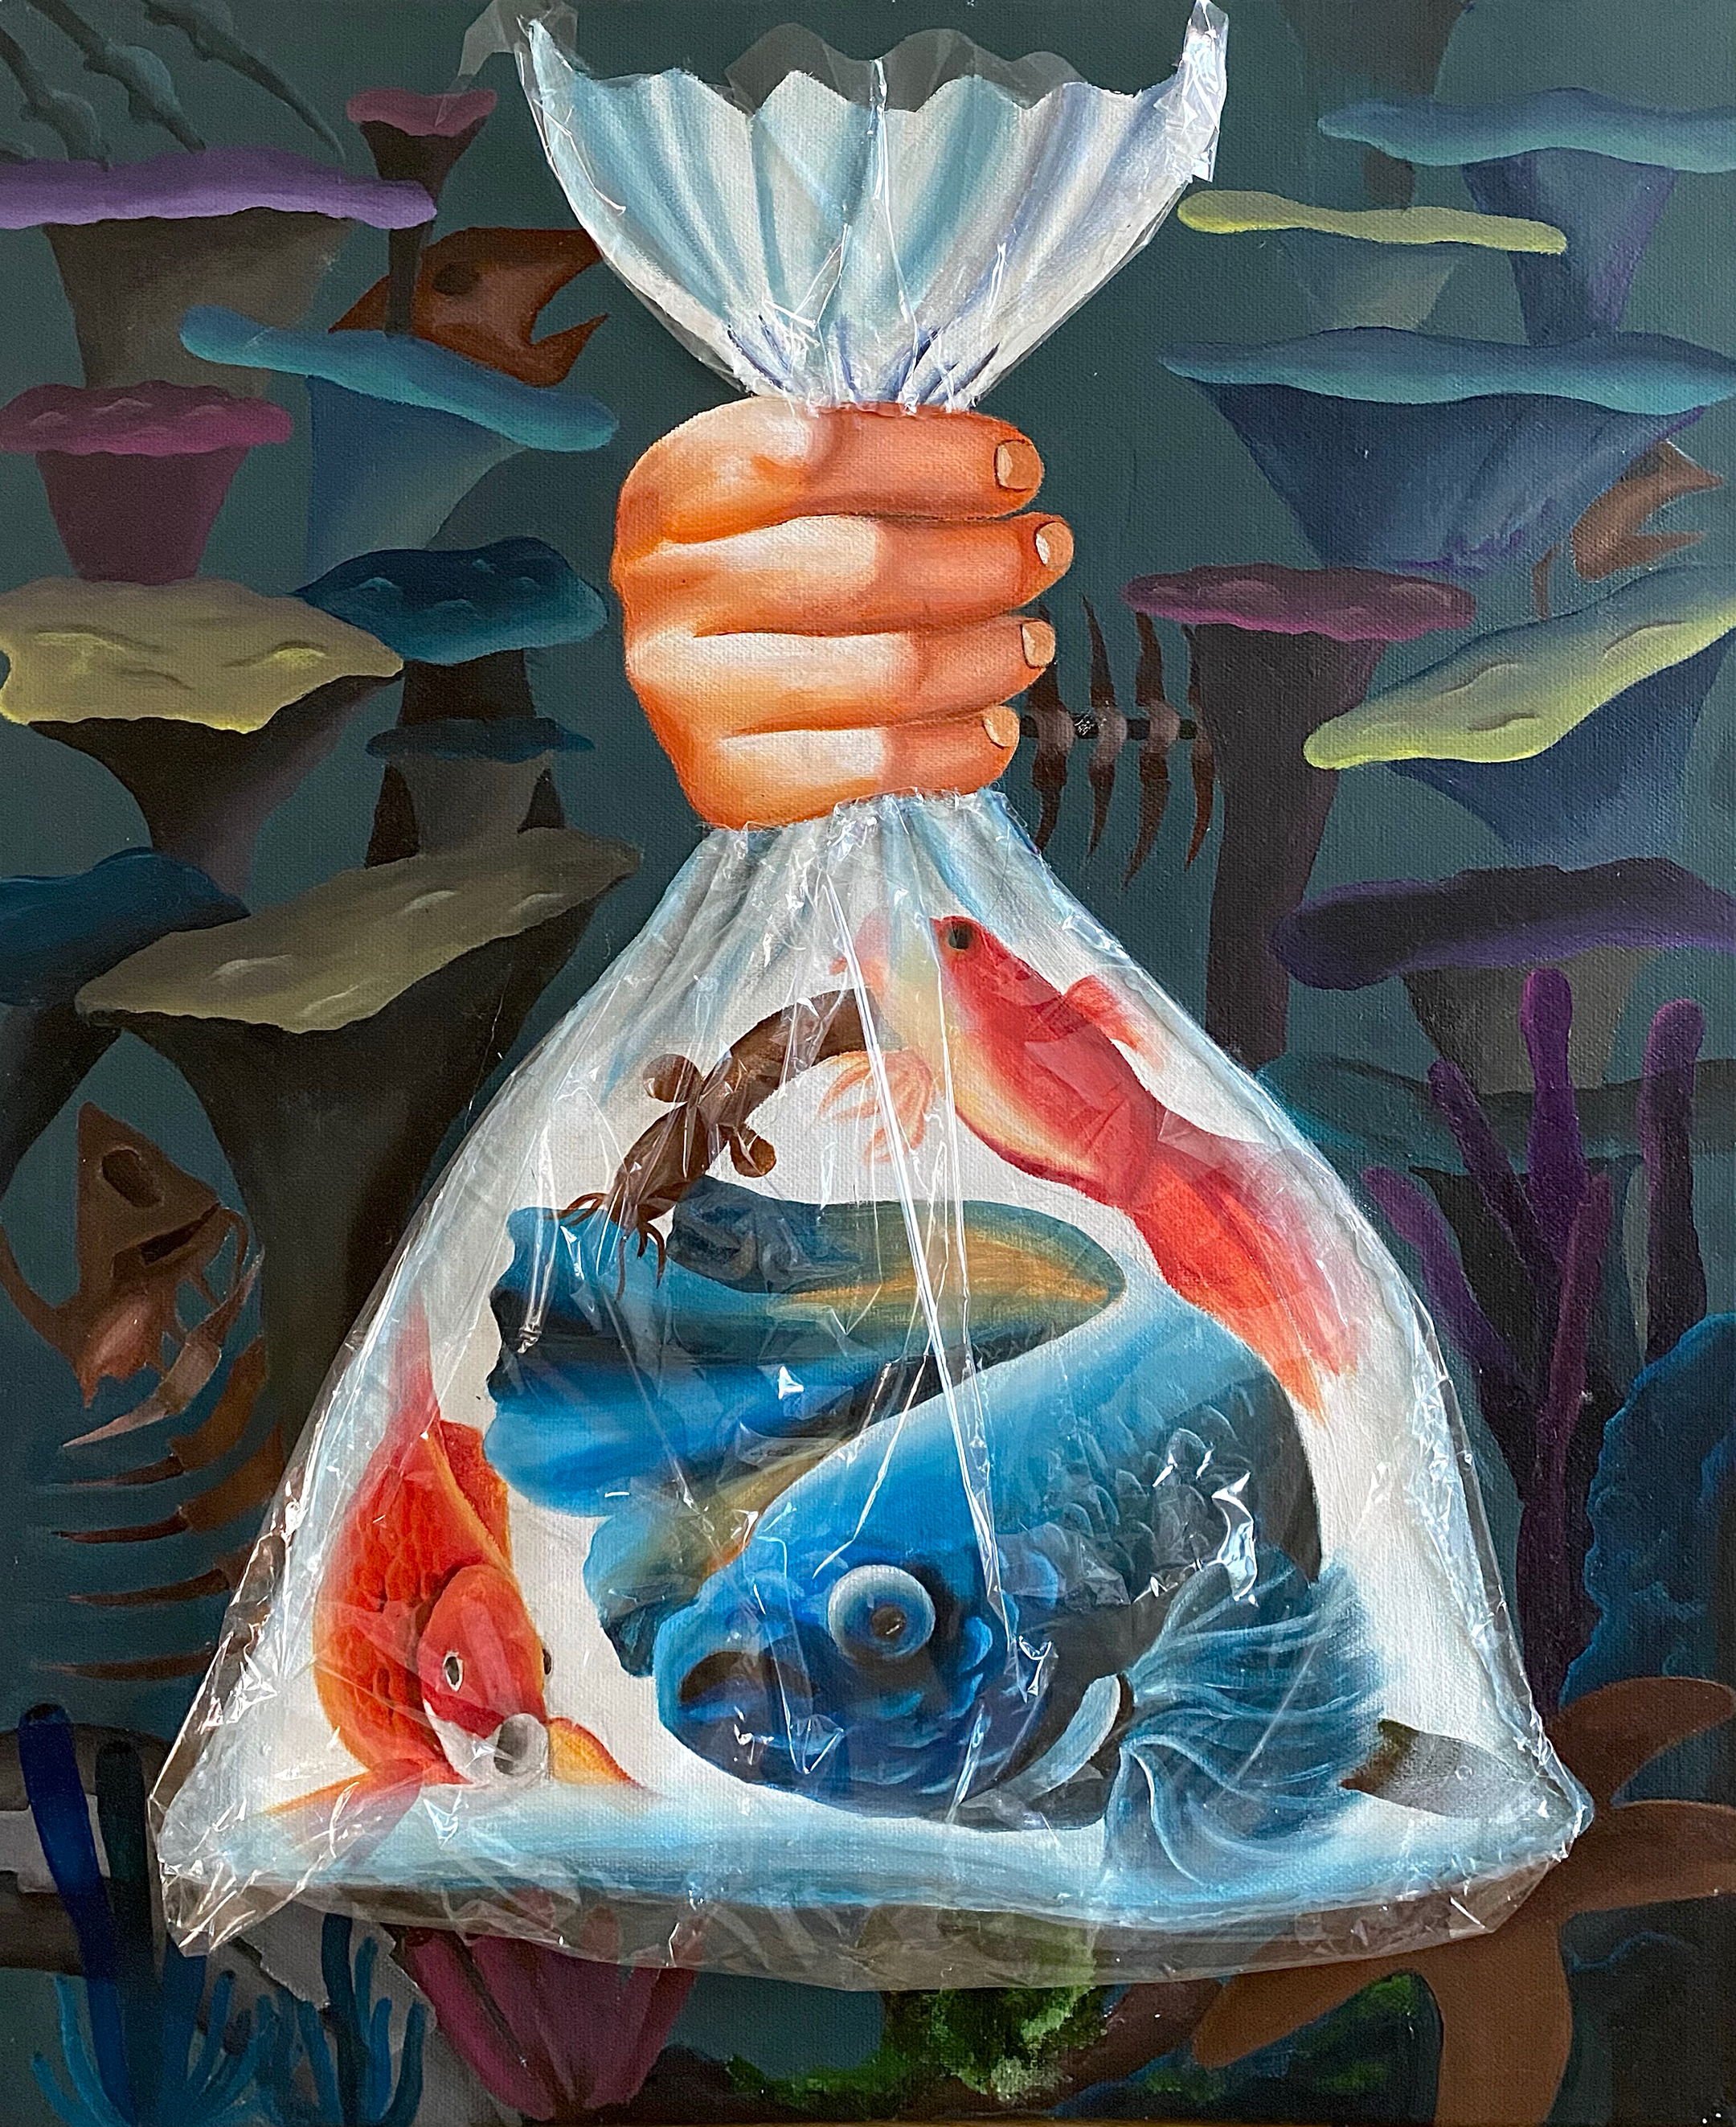 illustration of a hand holding a plastic bag full of fish of differing colors against a marine scene background